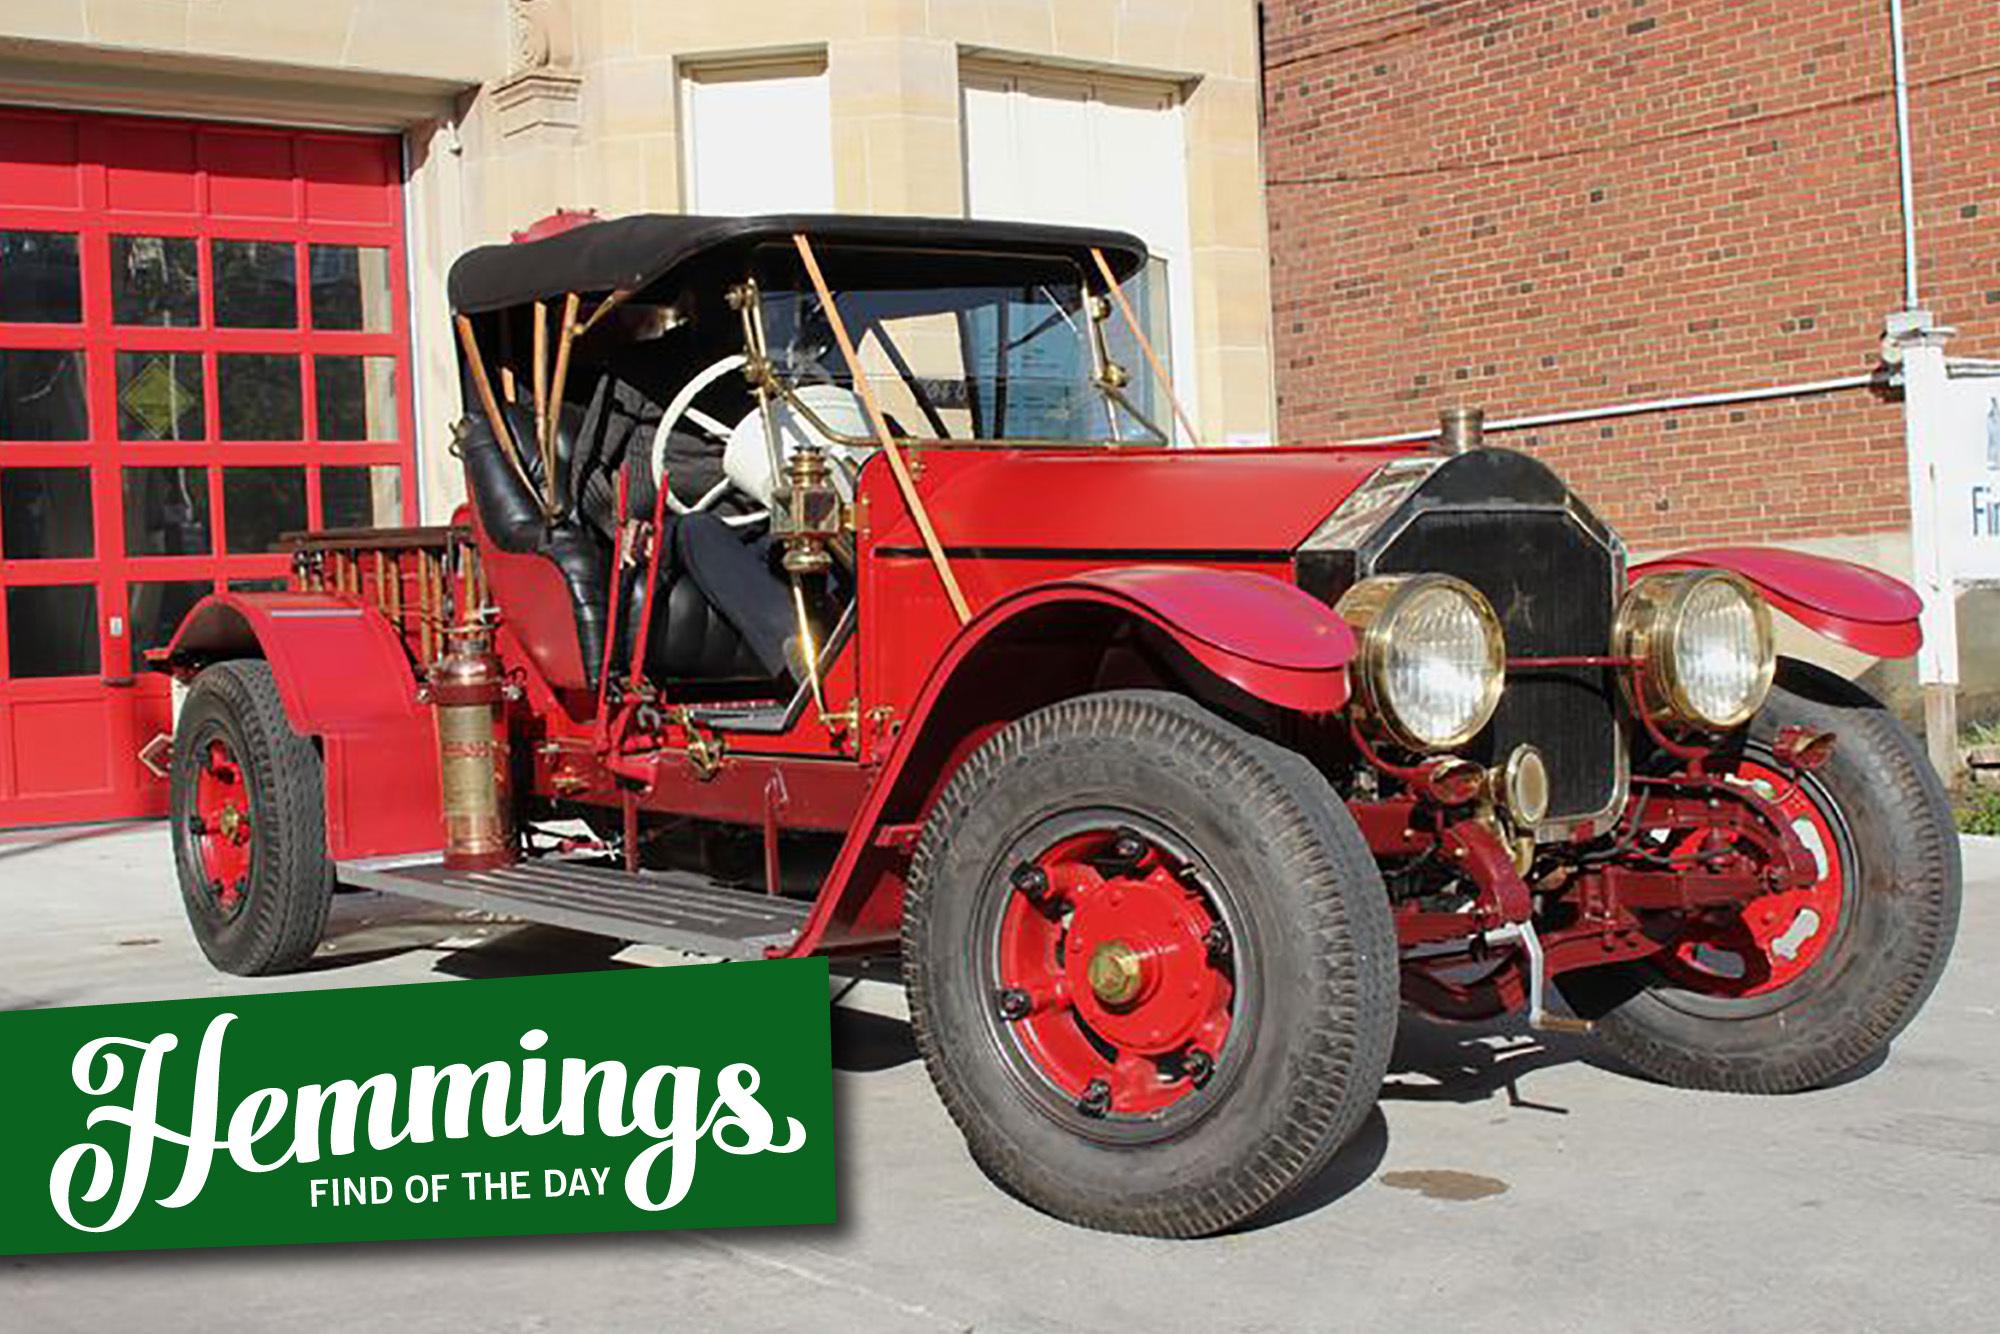 With a simple touring body, a 1925 American-LaFrance pumper truck becomes a what-if fire chief's car